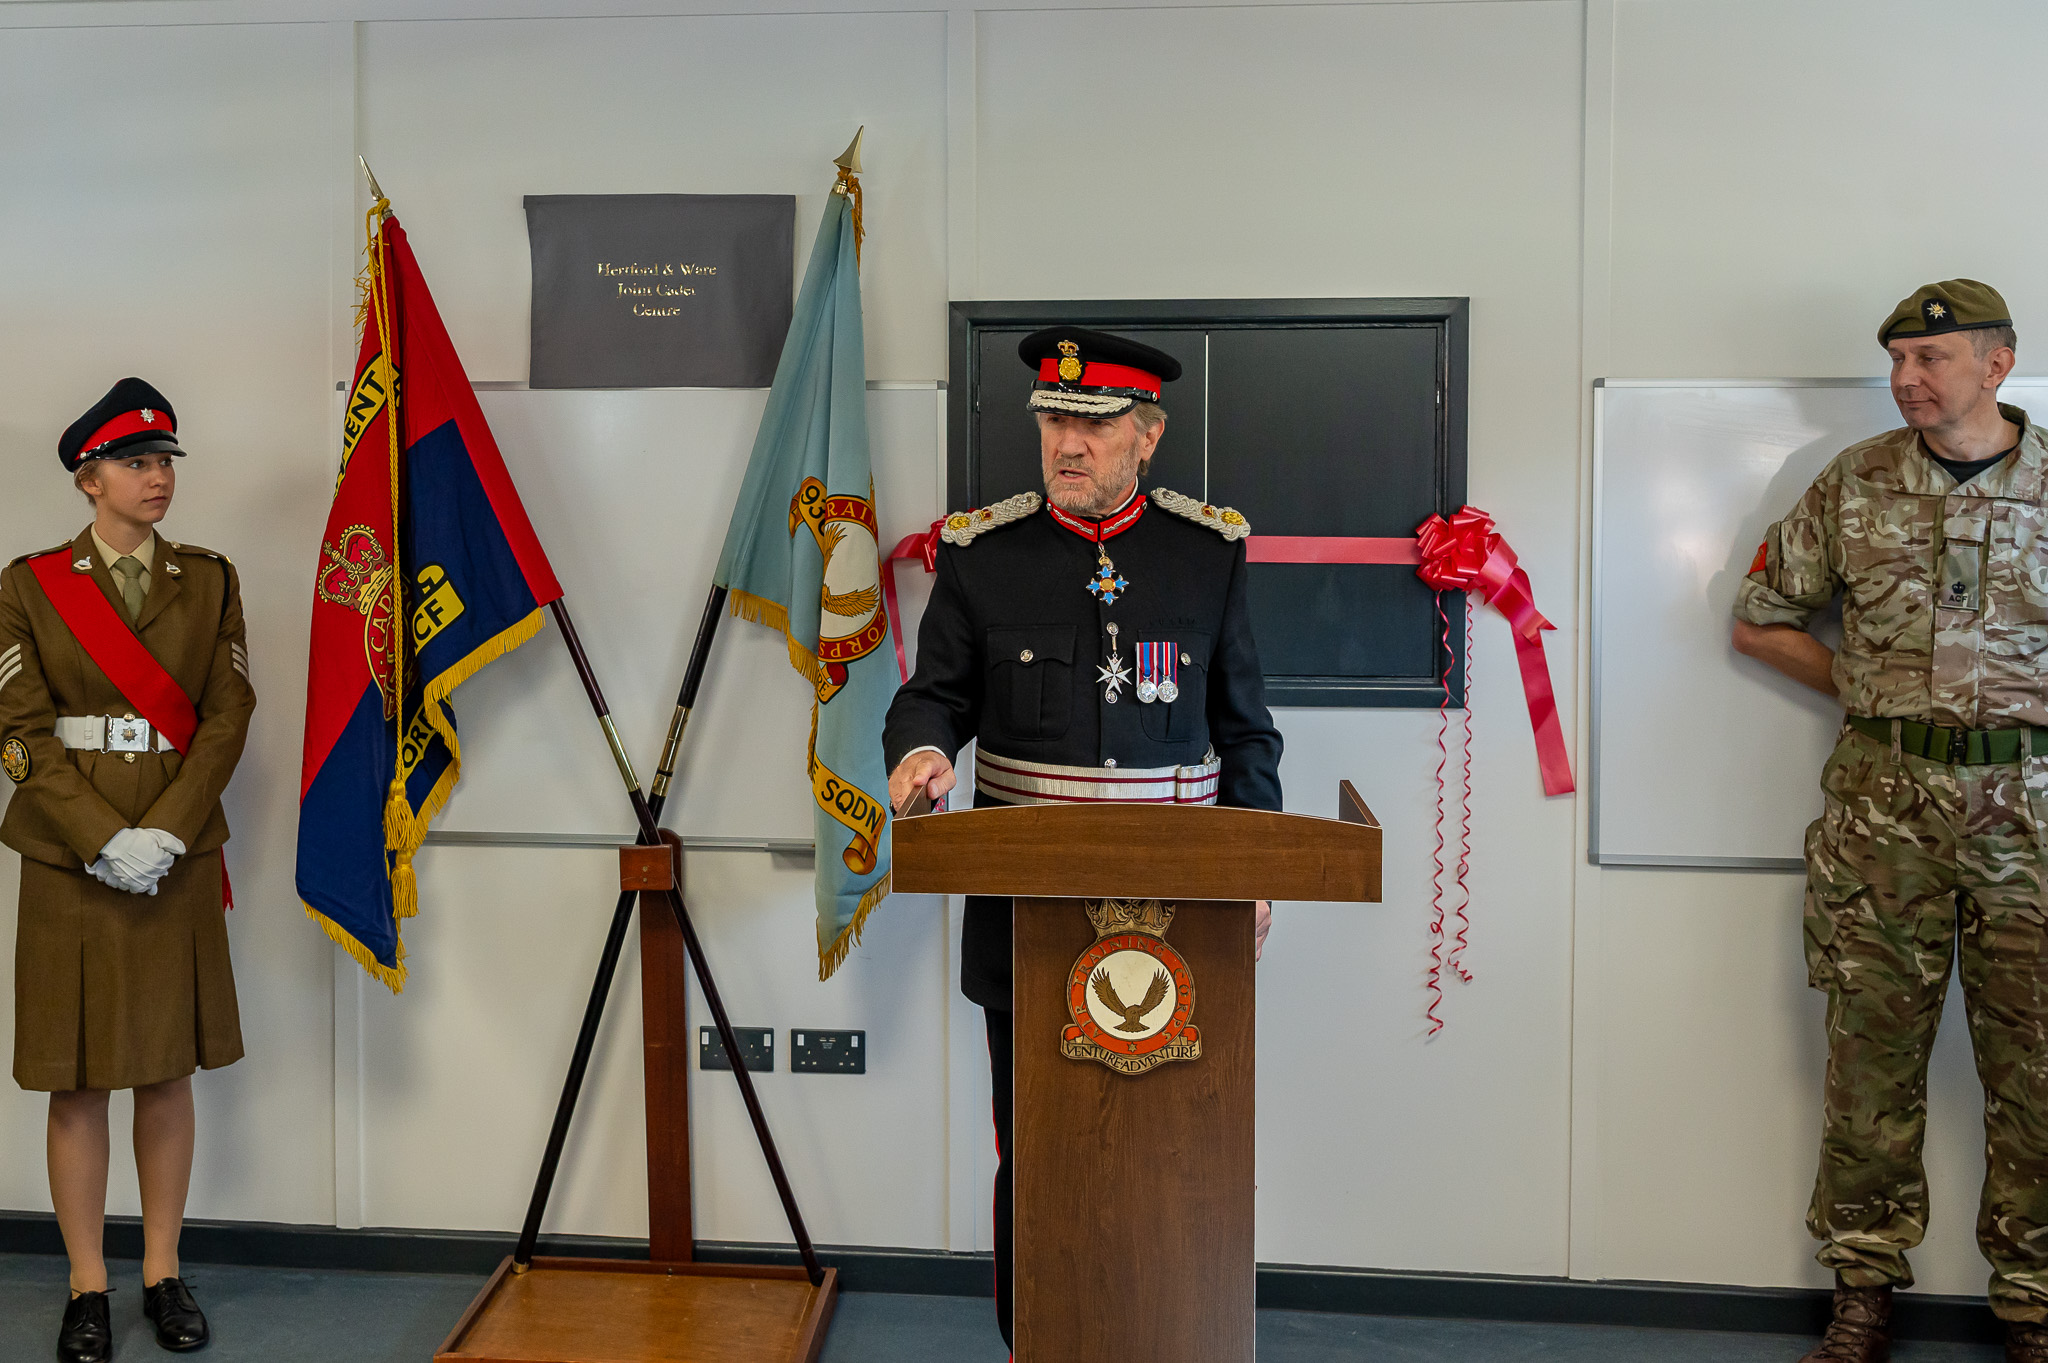 Opening of joint Air Force and Army Cadet Unit in Ware